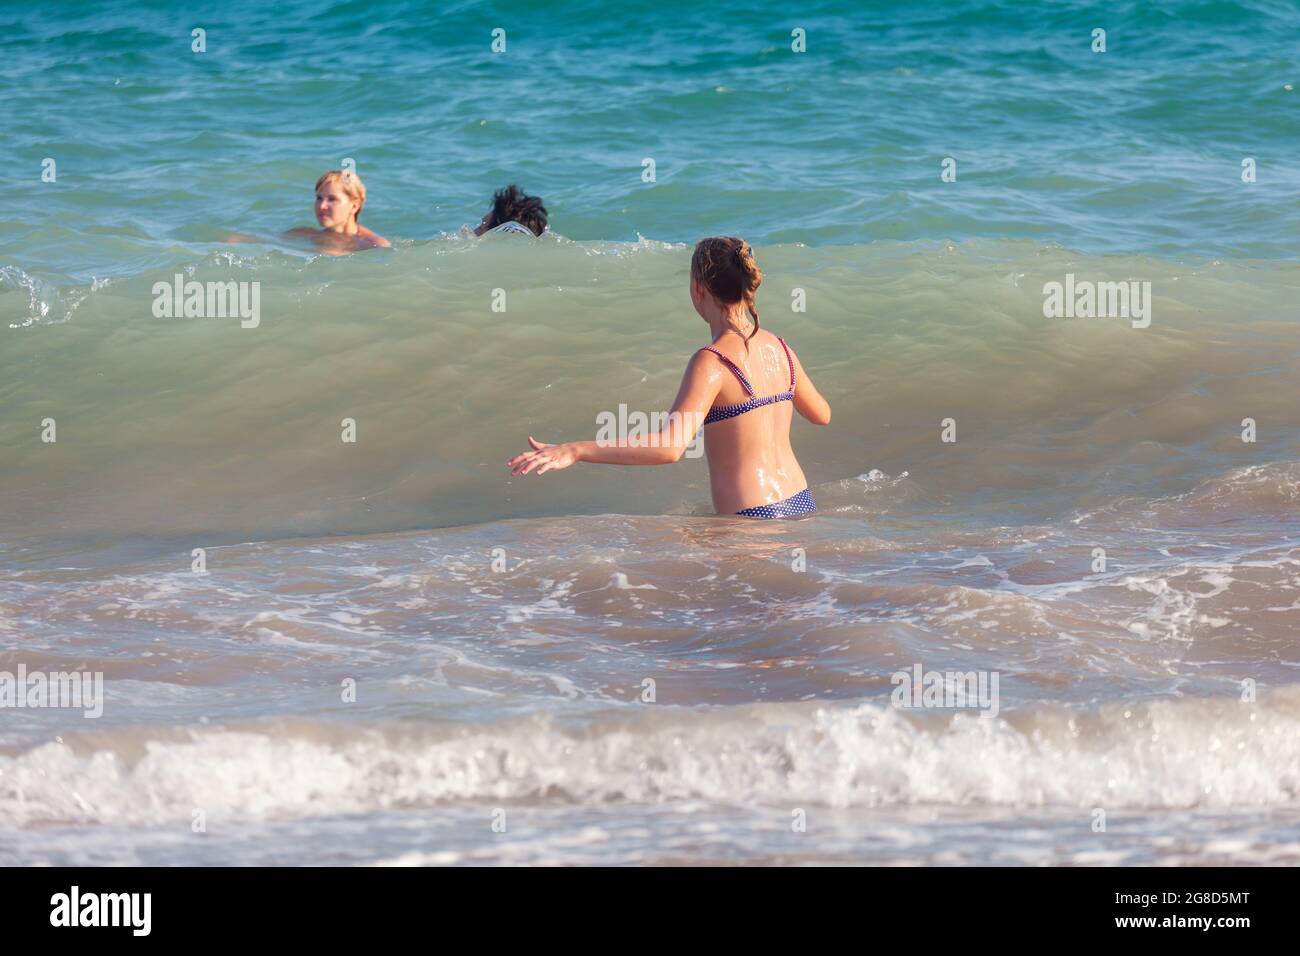 Antalya, Turkey-August 26, 2013: Joyful happy young girl waiting for the big wave in the sea while two other persons swimming on the background. Stock Photo